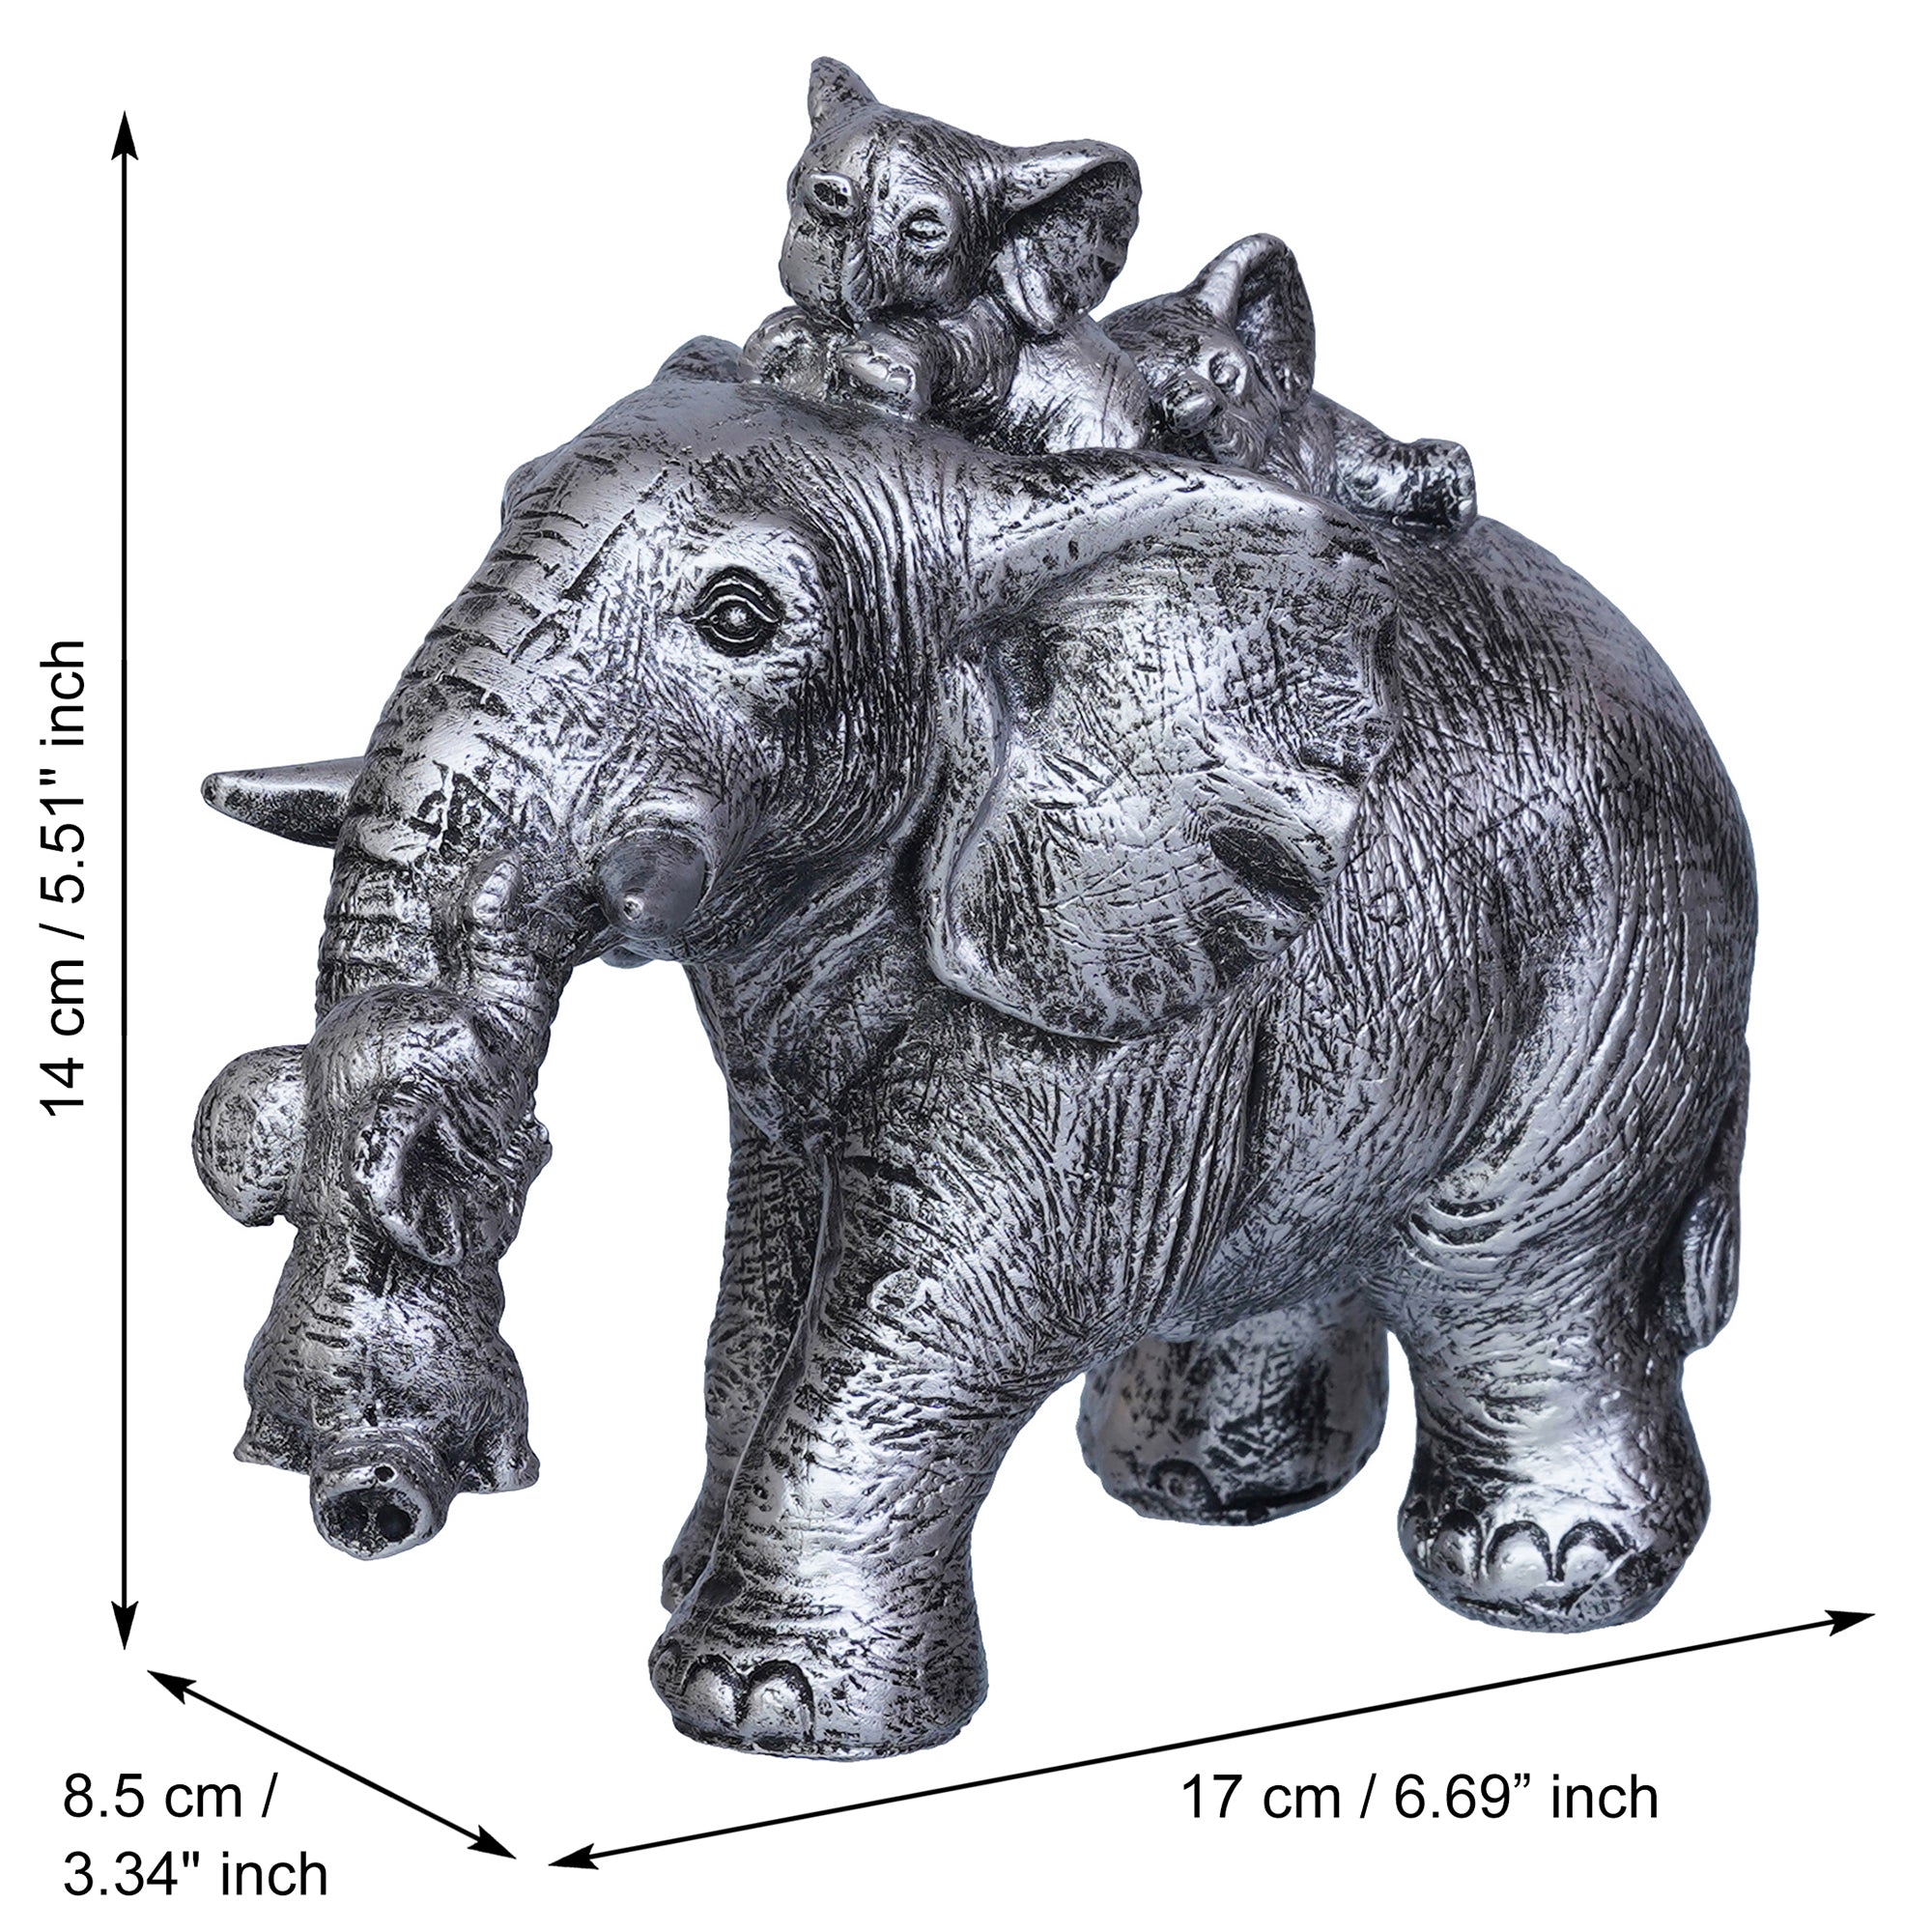 Cute Silver Elephant Statue Carries Three Calves on Its Back and Trunk 3